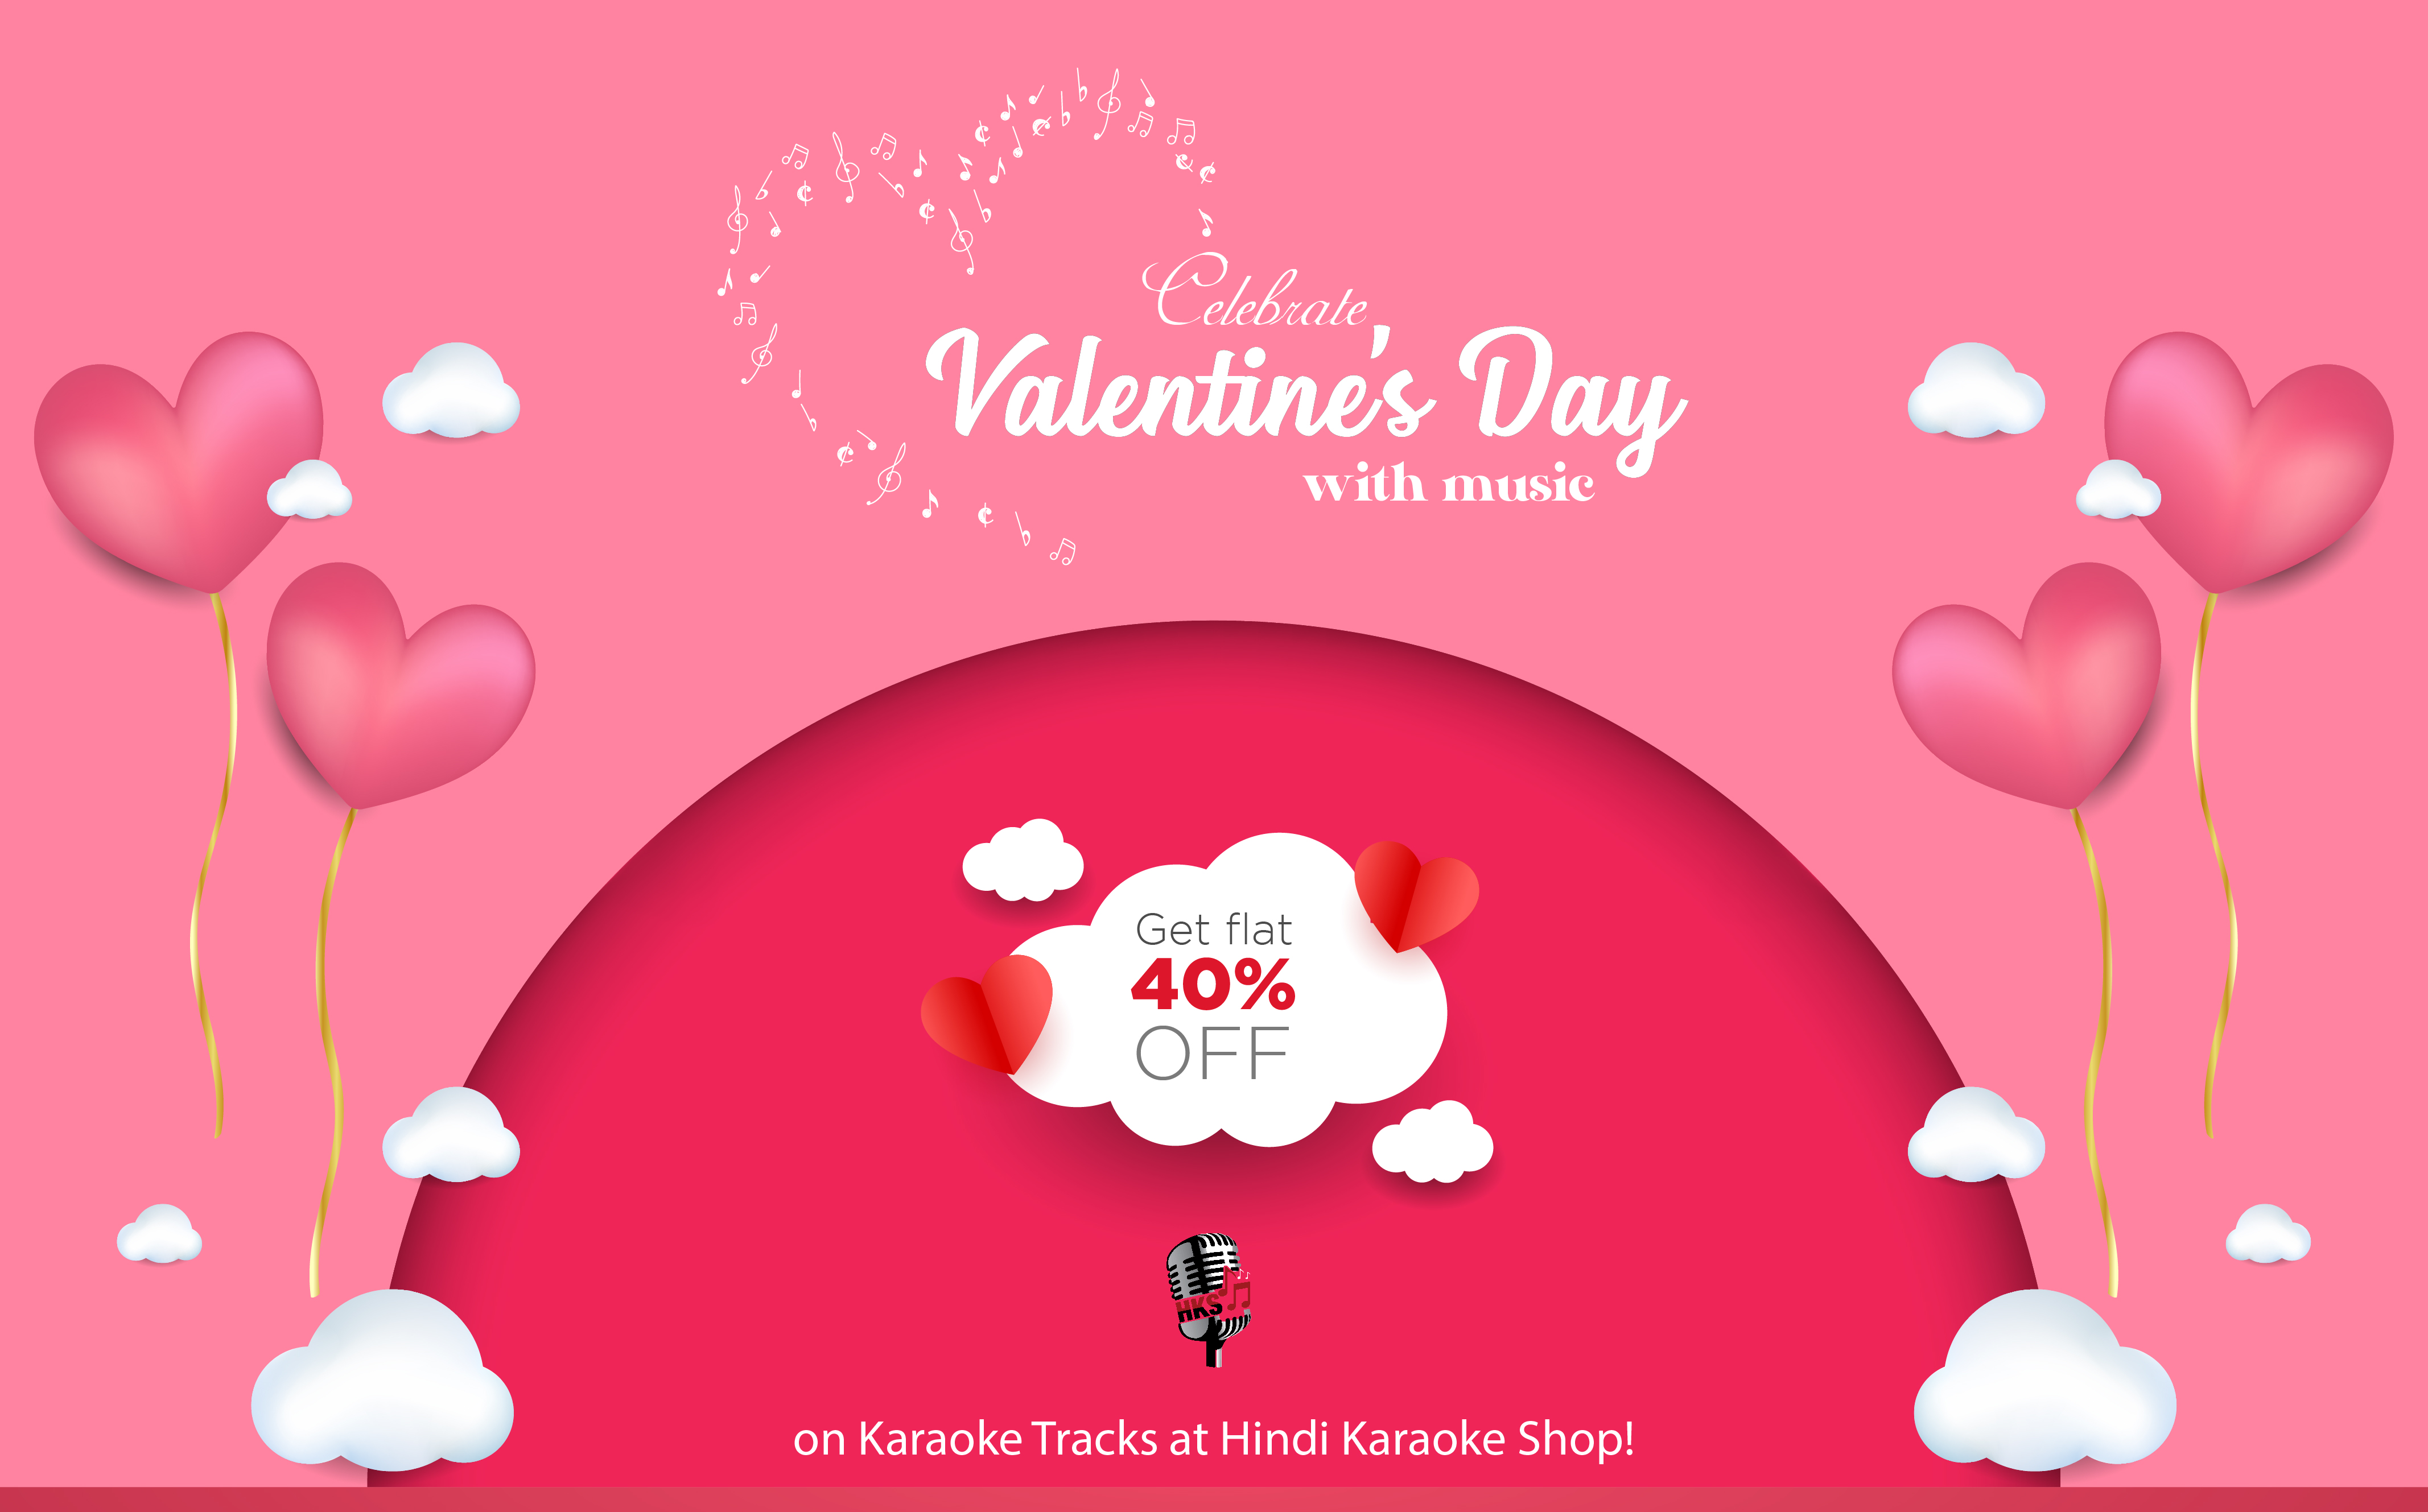 Celebrate Valentines Day with Music and Get 40% Off on Karaoke Tracks at Hindi Karaoke Shop!